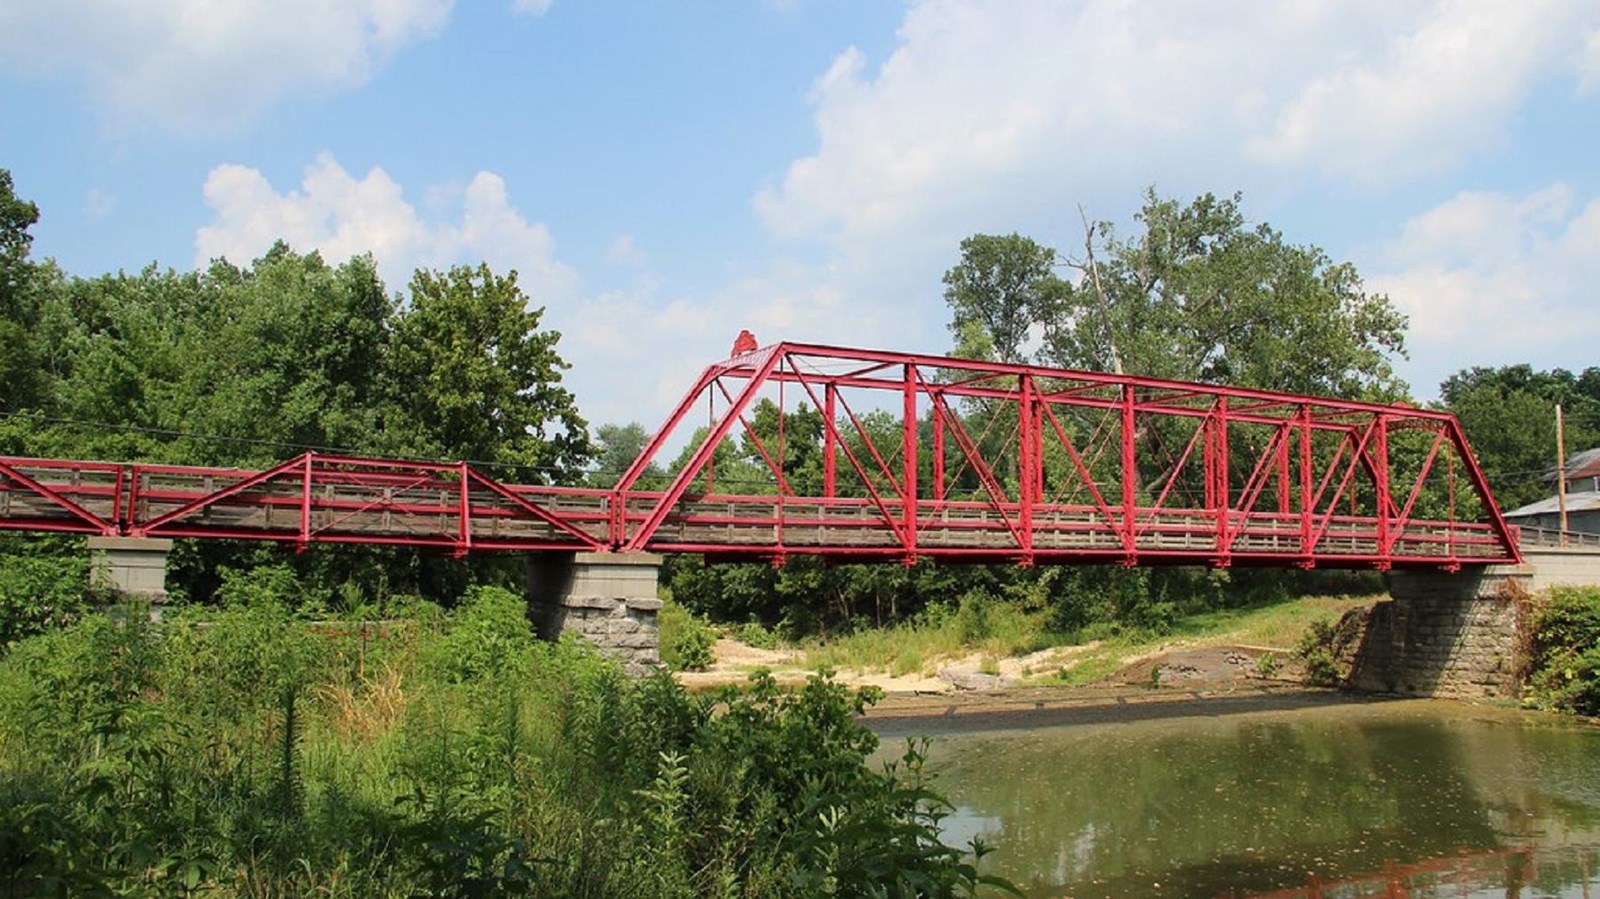 A red steel bridge spans a wide river lined with trees